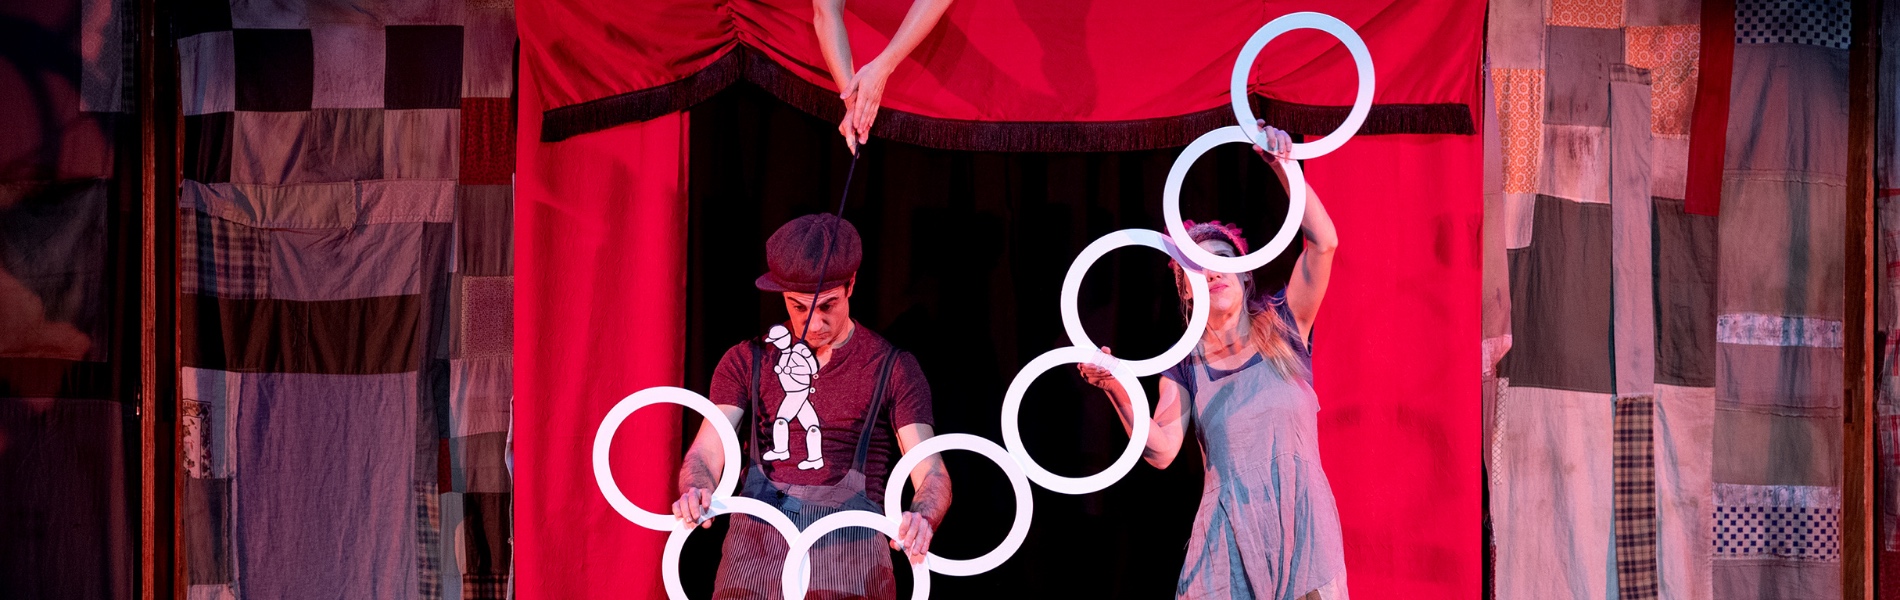 Performers hold rings in front of a red tent.